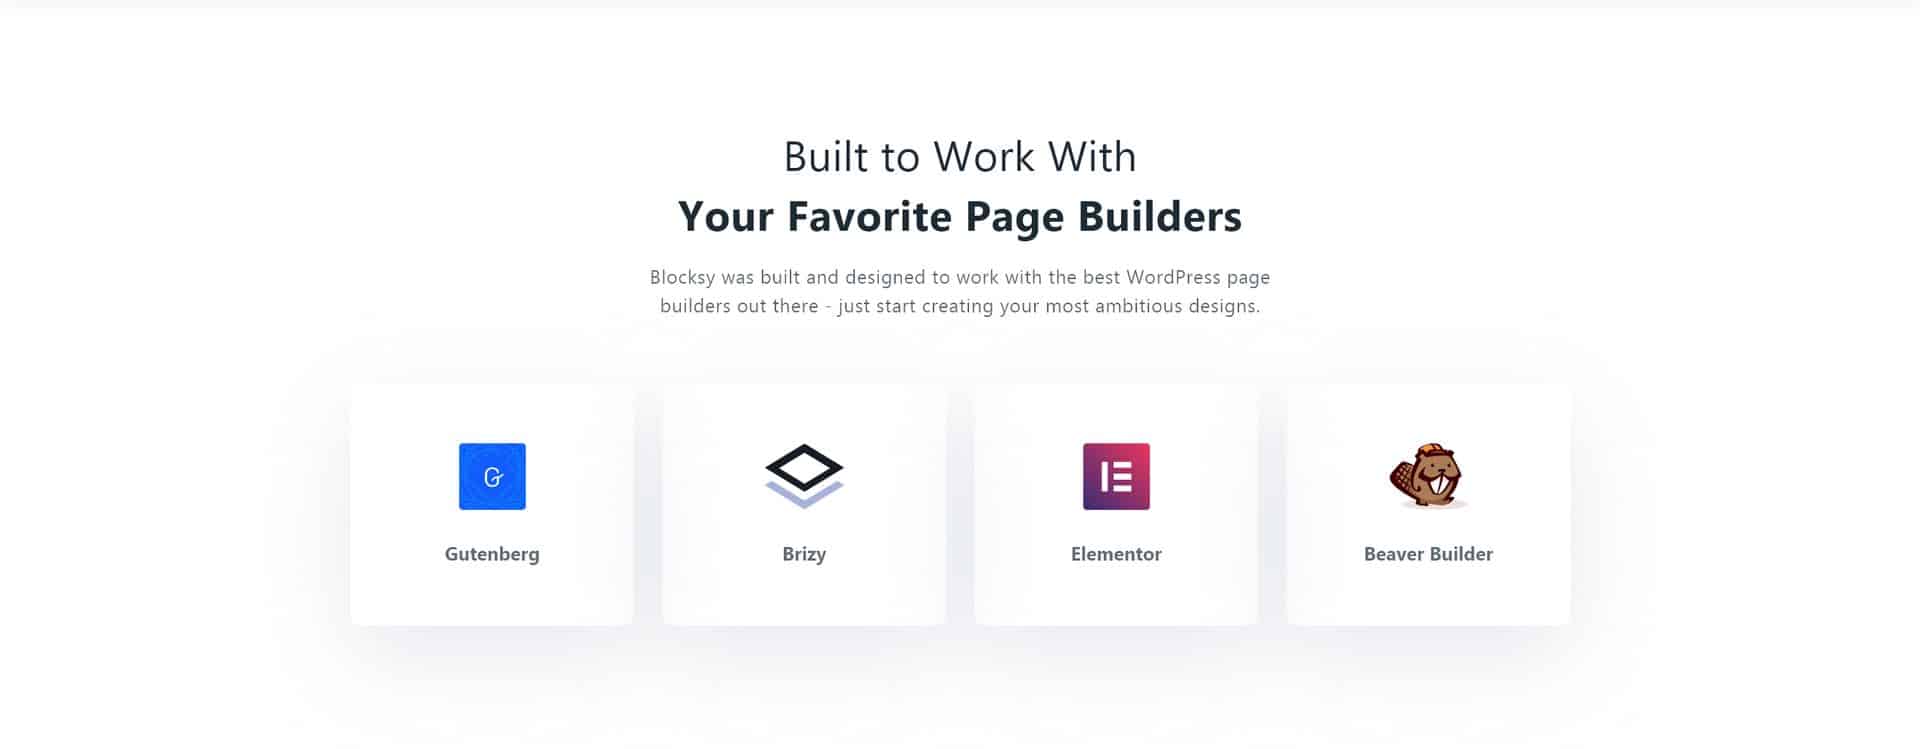 Blocksy - Built to Work With Your Favorite Page Builders